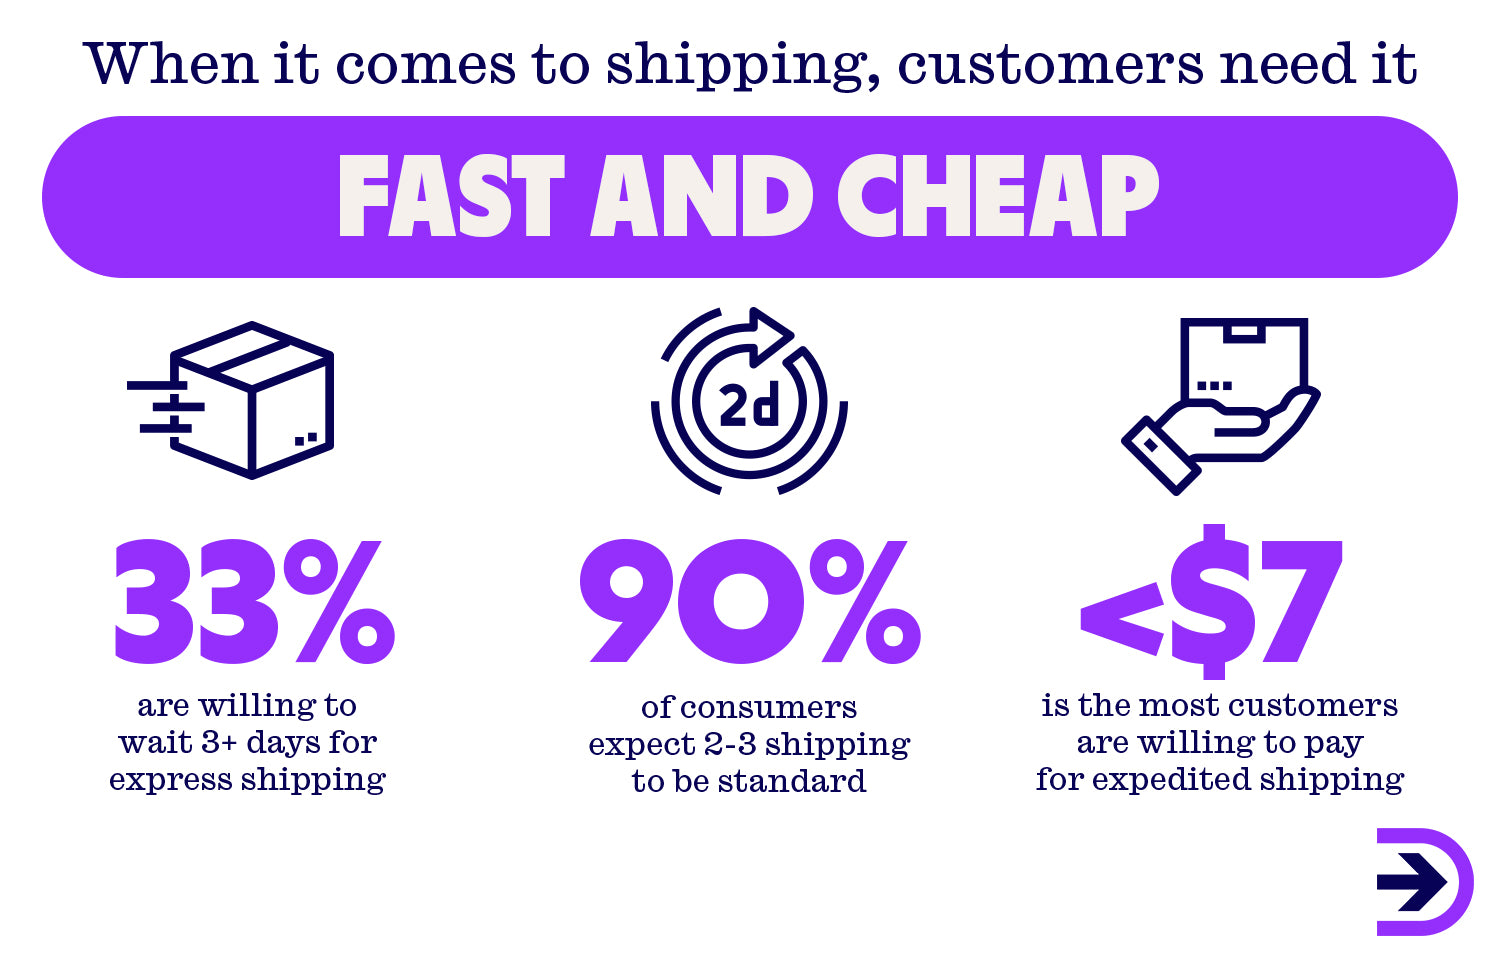 Customers want their online orders fast and cheap with only a third of customers willing to wait over 3 days for express shipping.